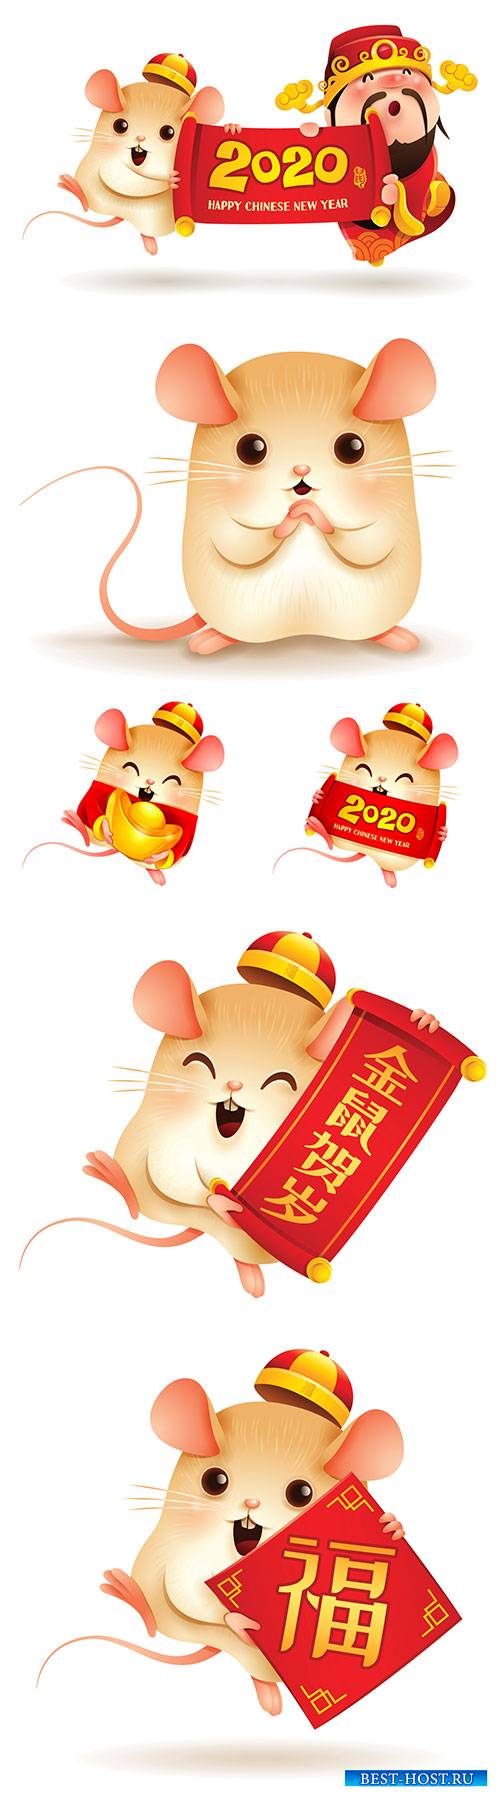 The Little Rat with Chinese scroll 2020